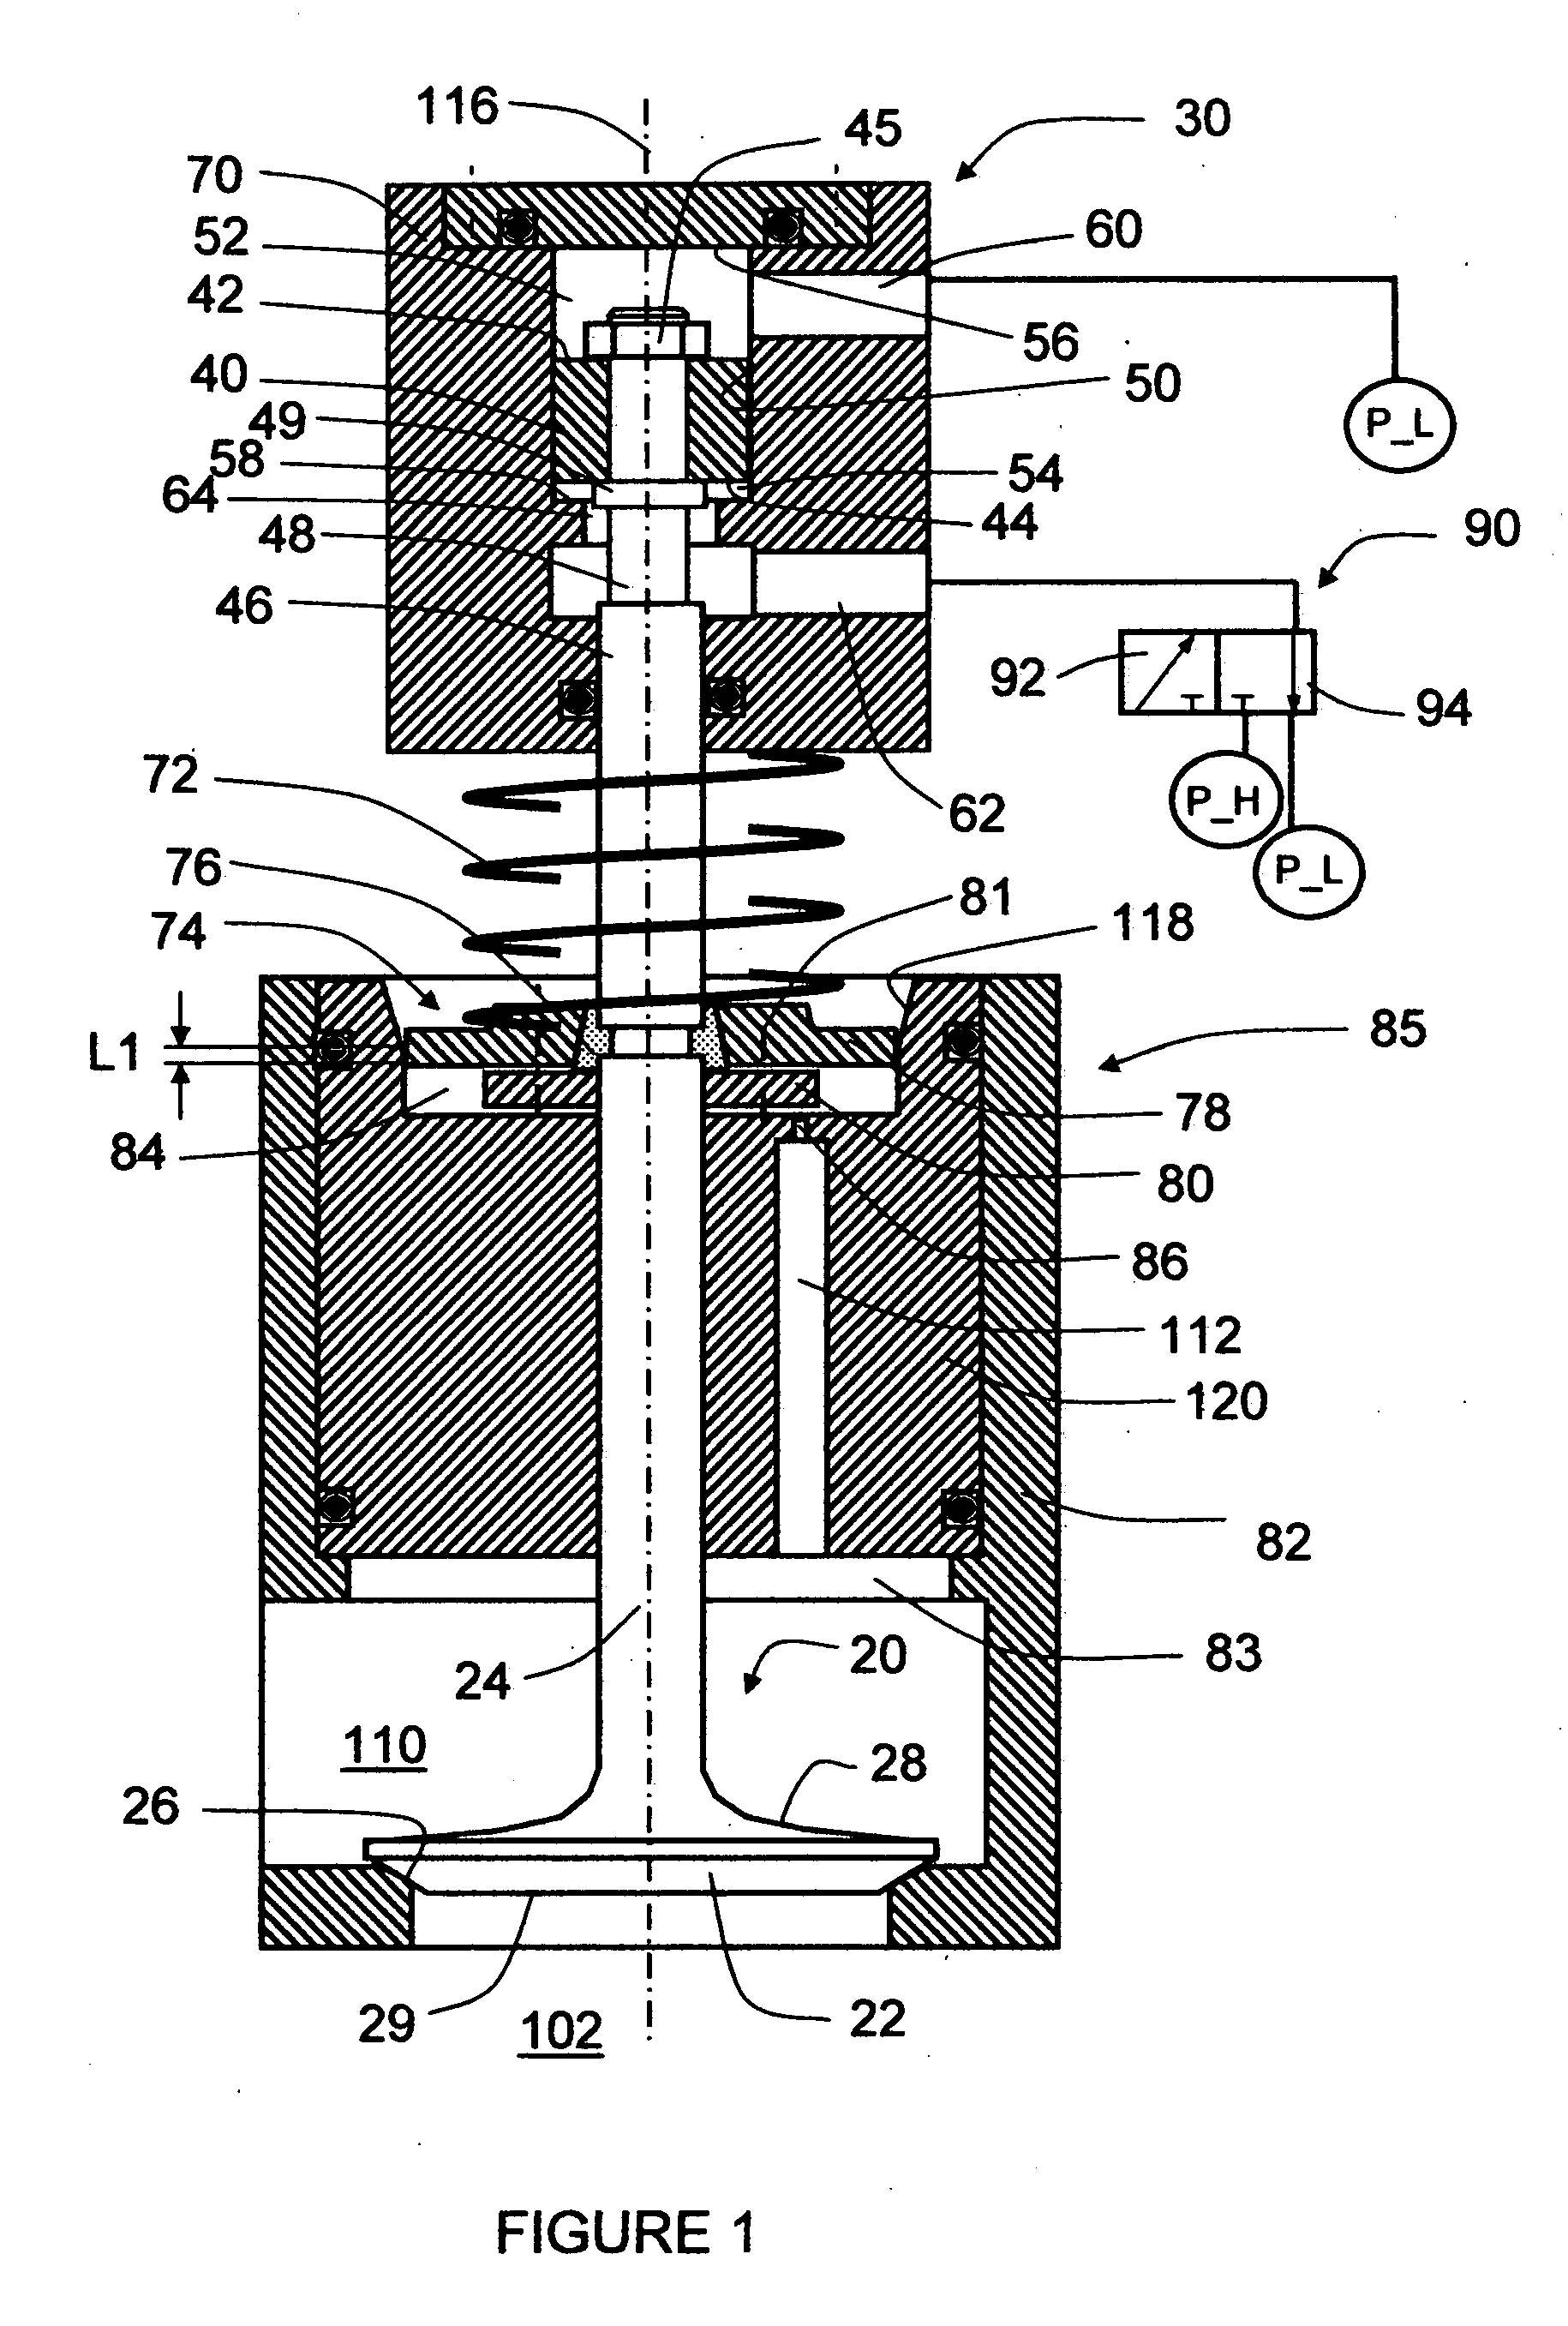 Variable valve actuator with a pneumatic booster